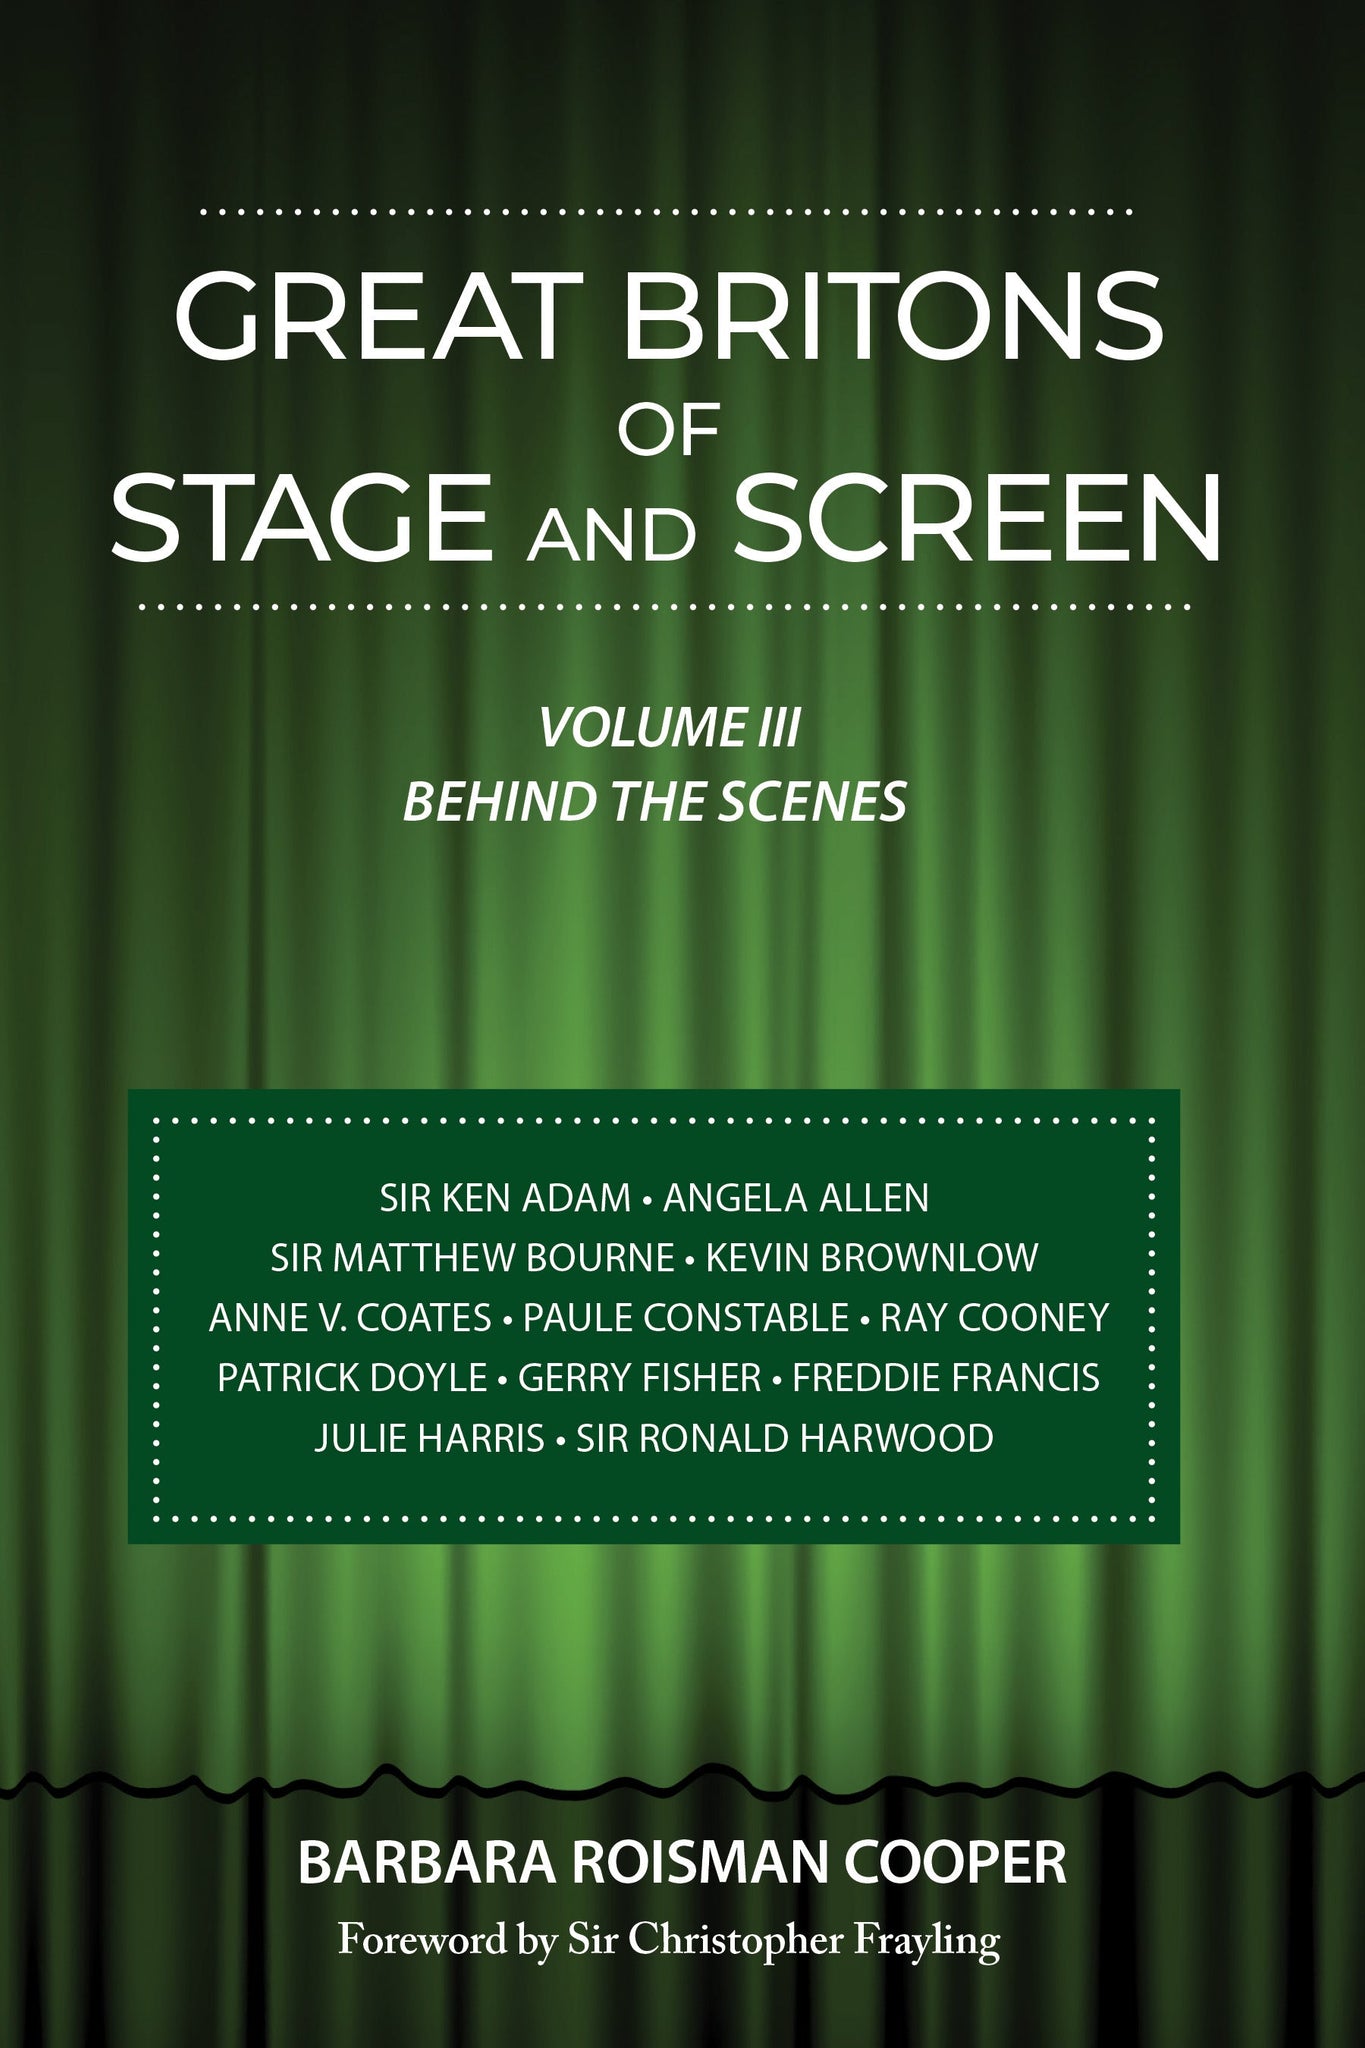 Great Britons of Stage and Screen: Volume III: Behind the Scenes (hardback)